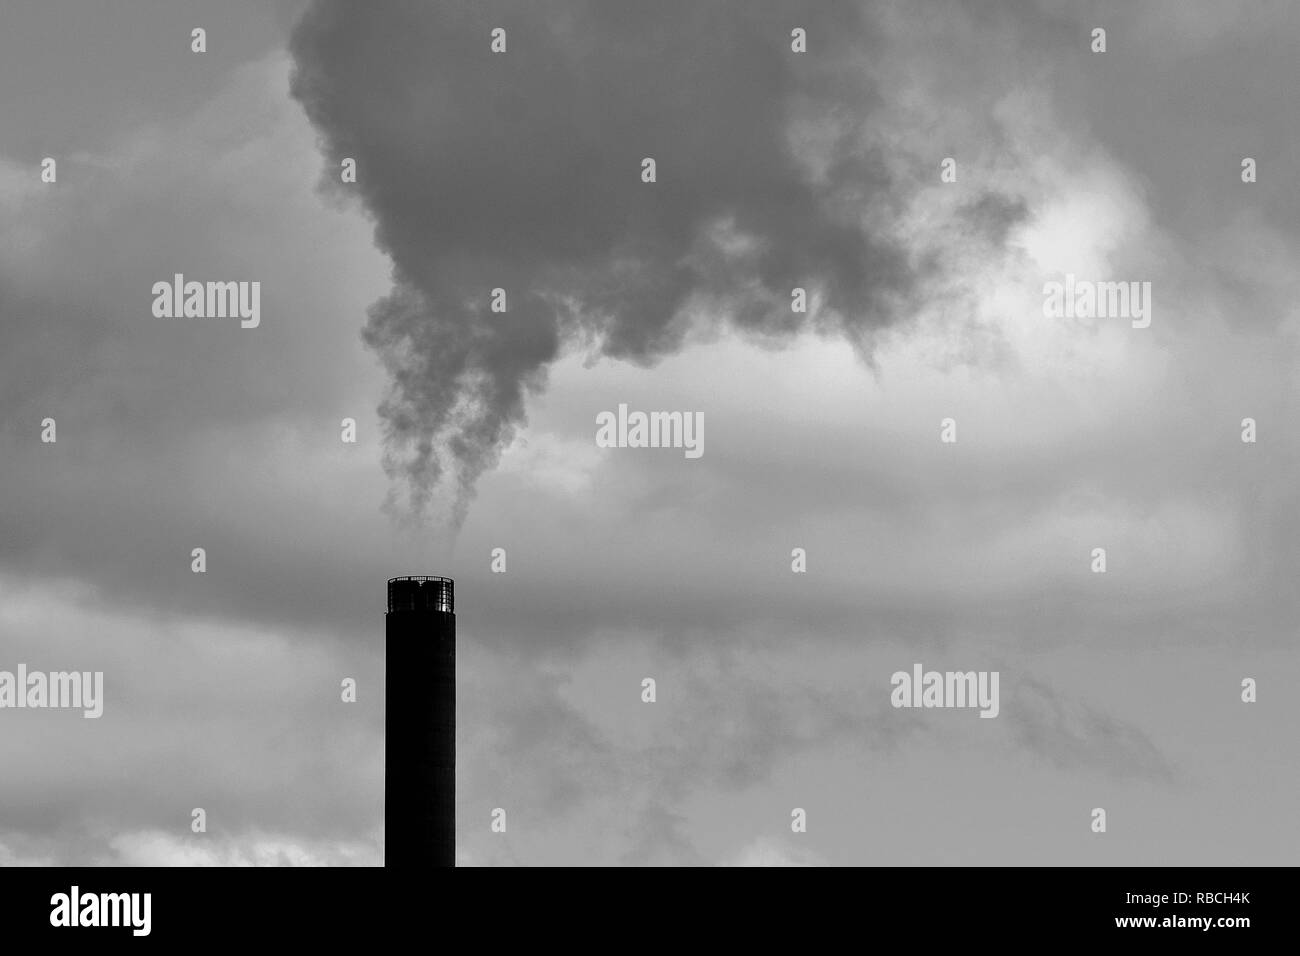 Smoke from chimney. Black and white image with copy space. Stock Photo